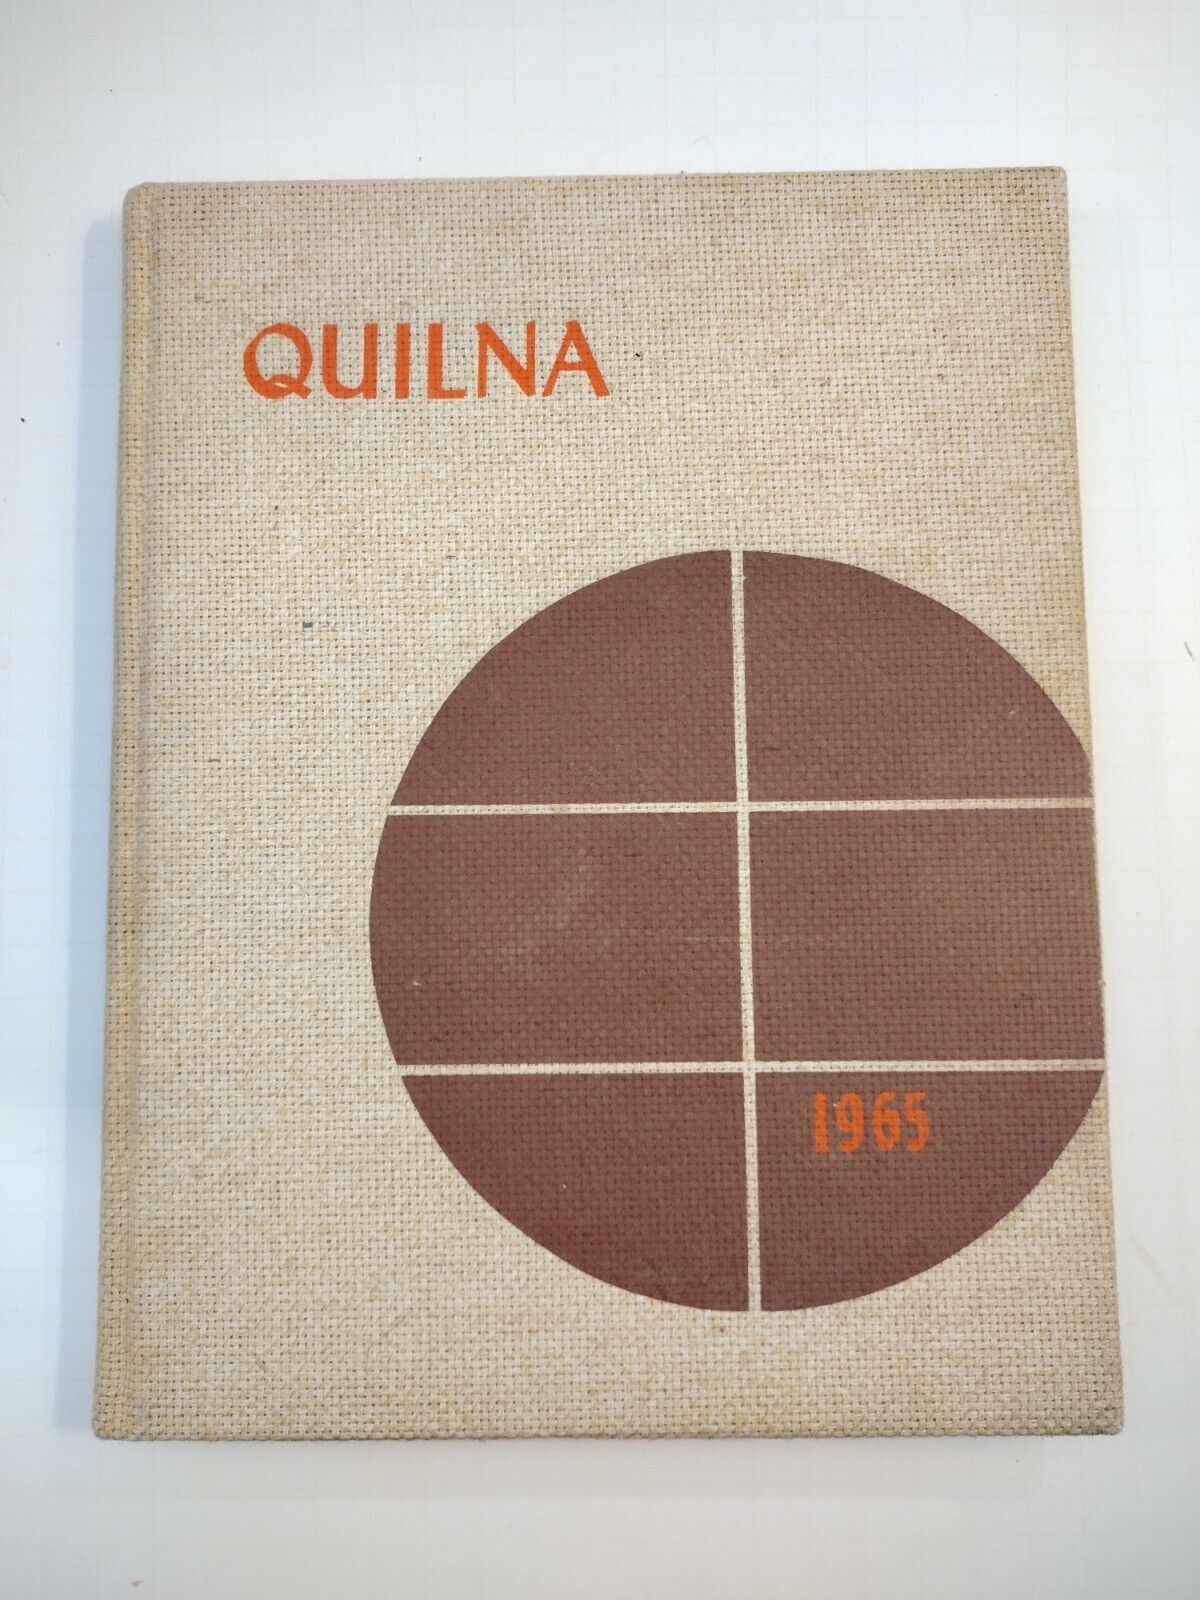 1965 Shawnee High School Yearbook Annual Lima Ohio OH - Quilna Vintage 